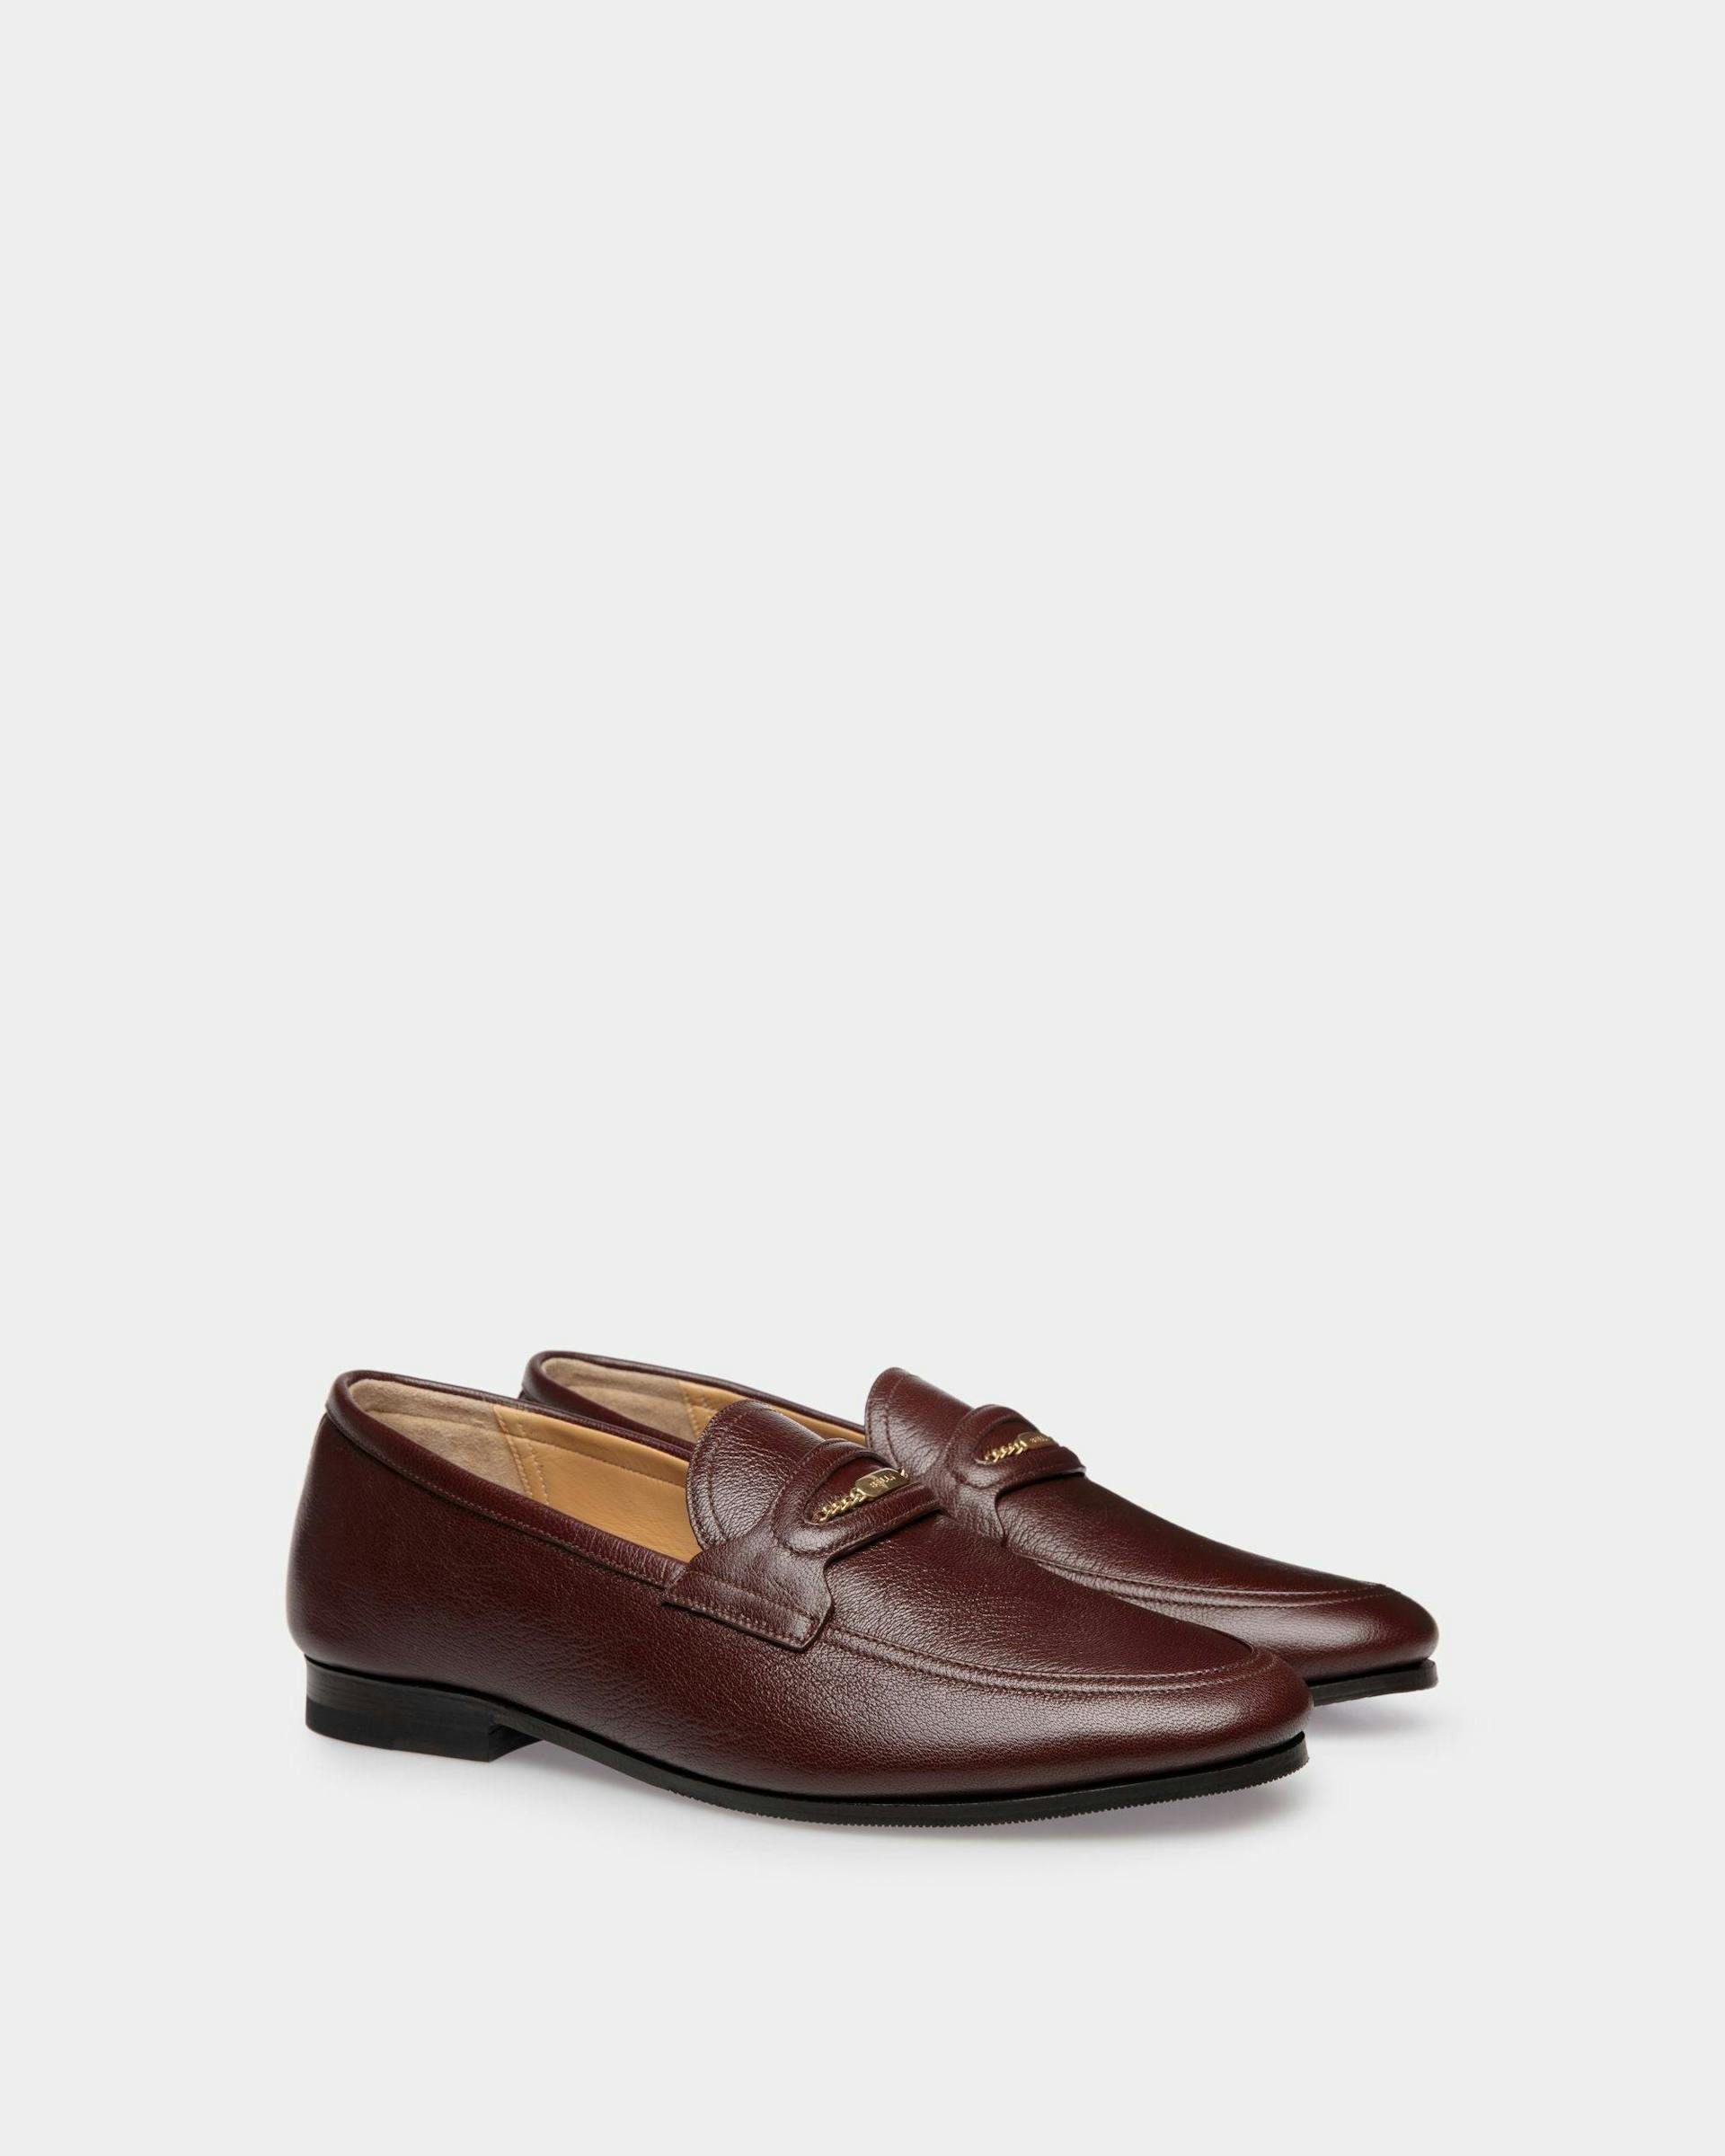 Men's Plume Loafer in Chestnut Brown Grained Leather | Bally | Still Life 3/4 Front